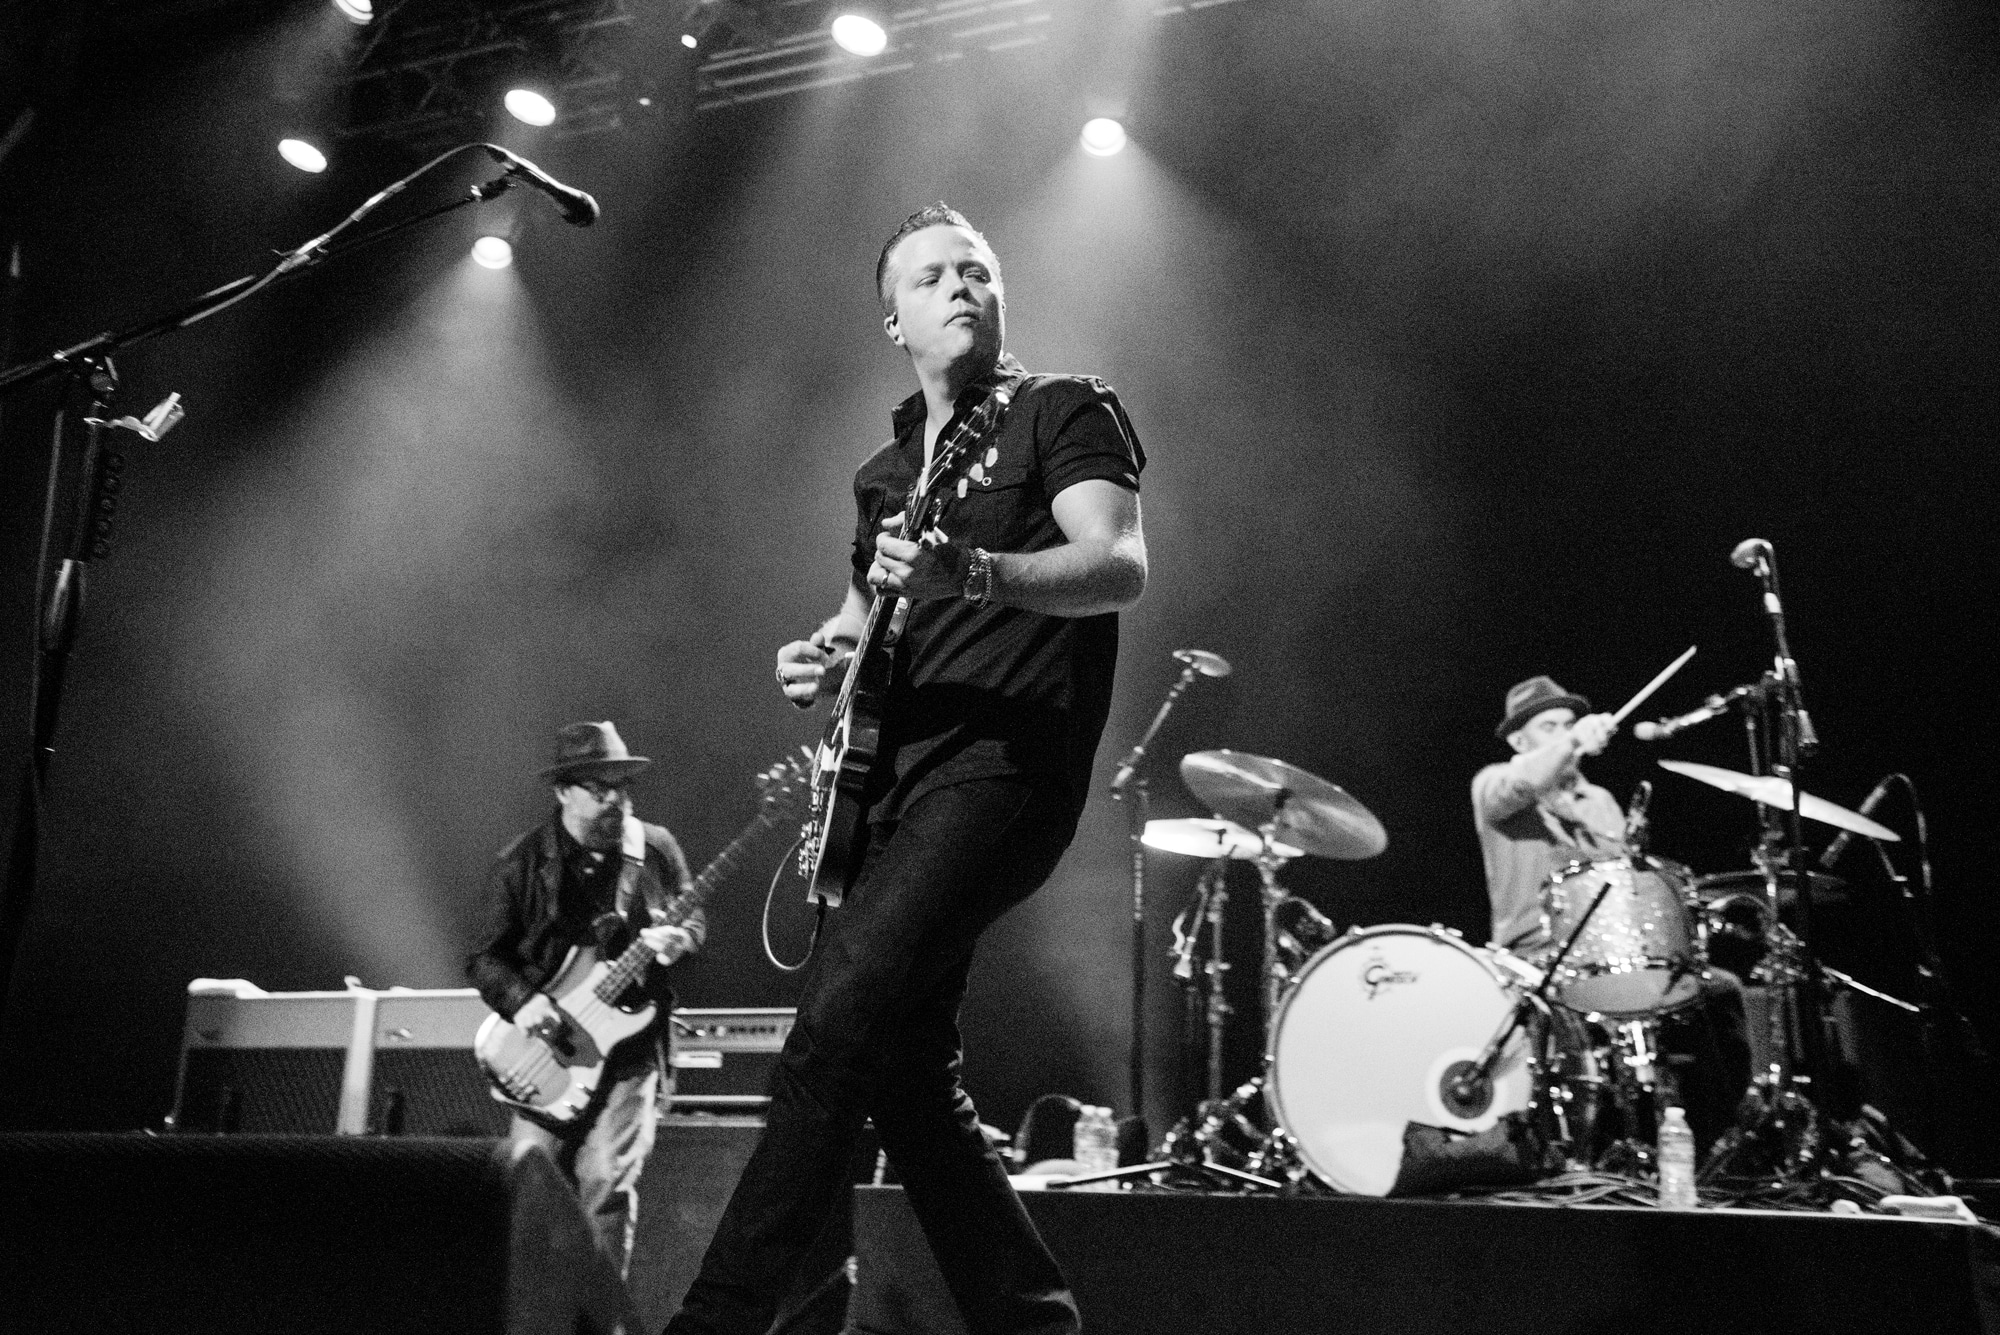 Photos: Jason Isbell and the 400 Unit at House of Blues, Anaheim, California.